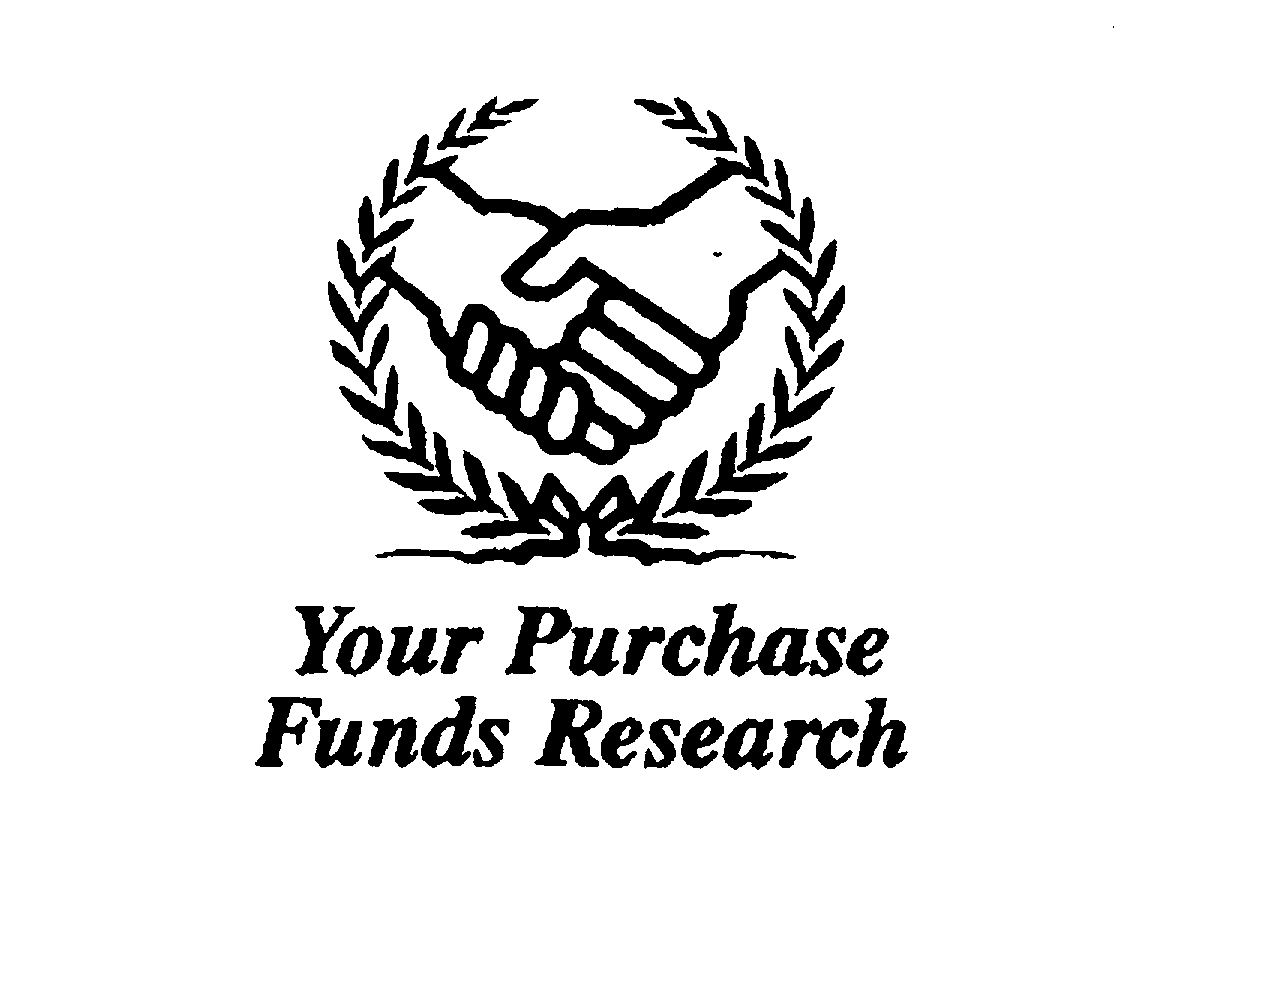  YOUR PURCHASE FUNDS RESEARCH